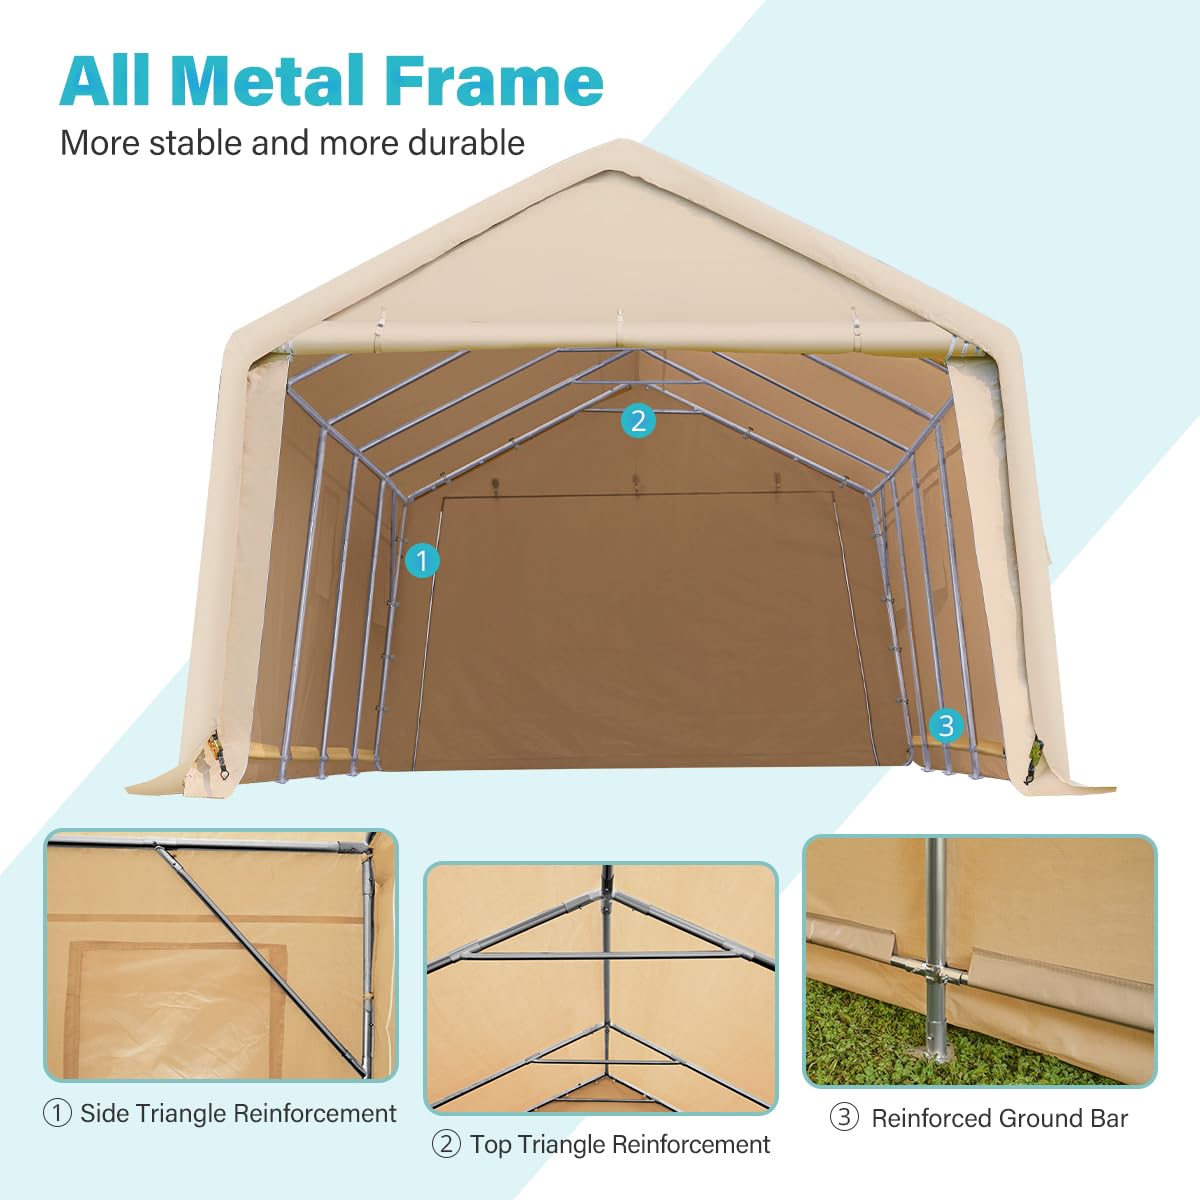 ADVANCE OUTDOOR 13x20 ft Garage Tent Carports with 2 Roll up Doors and Vents Outdoor Portable Storage Shelter for Vehicl Truck Boat Anti-UV S Resistant Waterproof, Beige, (8809BY-2) 13'x20'